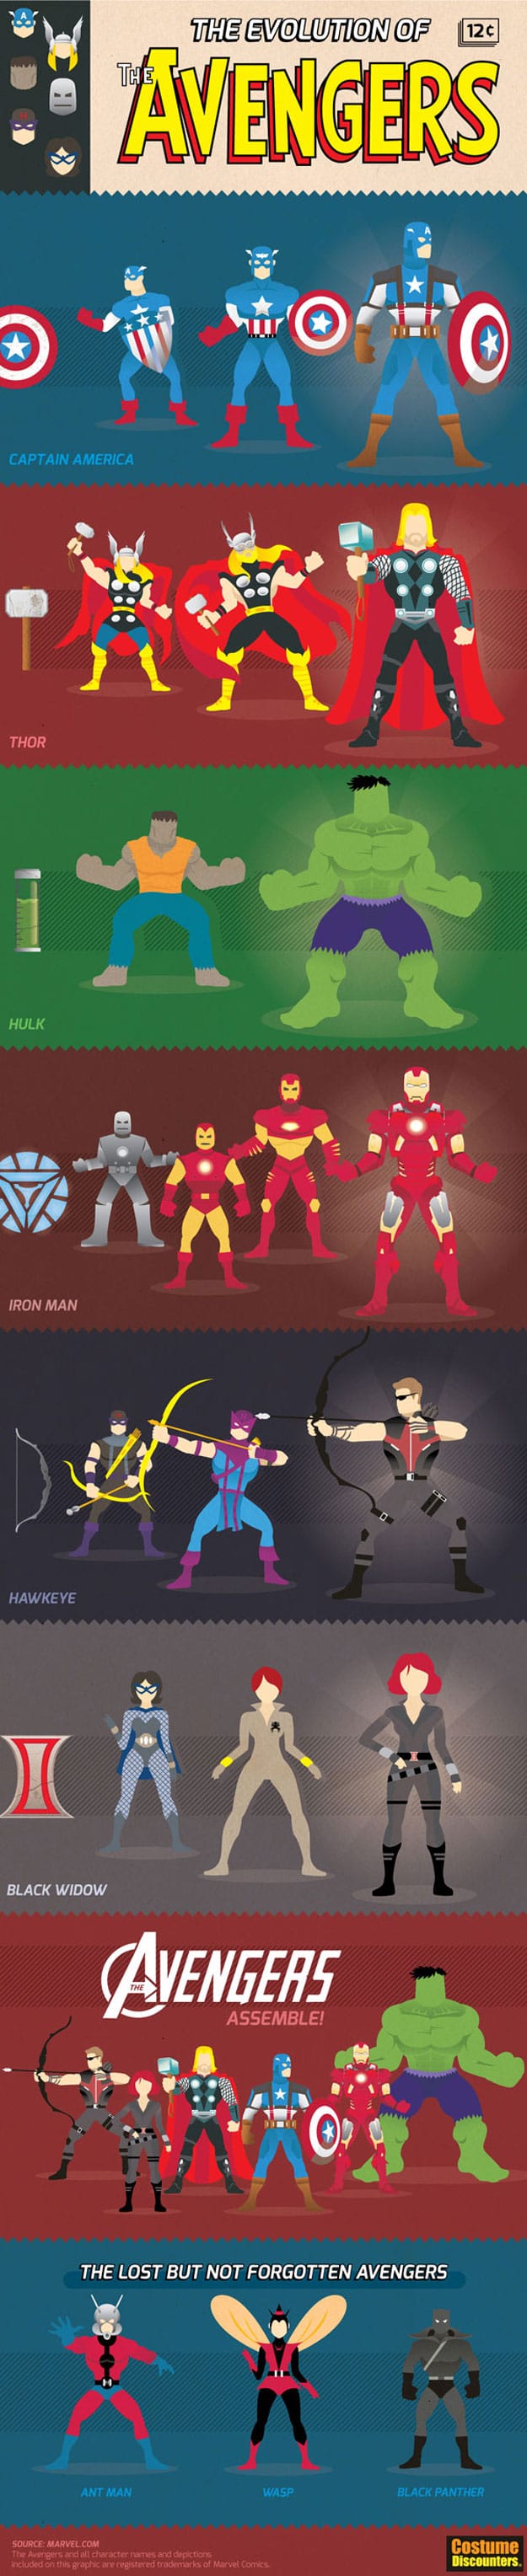 Evolution-Of-The-Avengers-Infographic